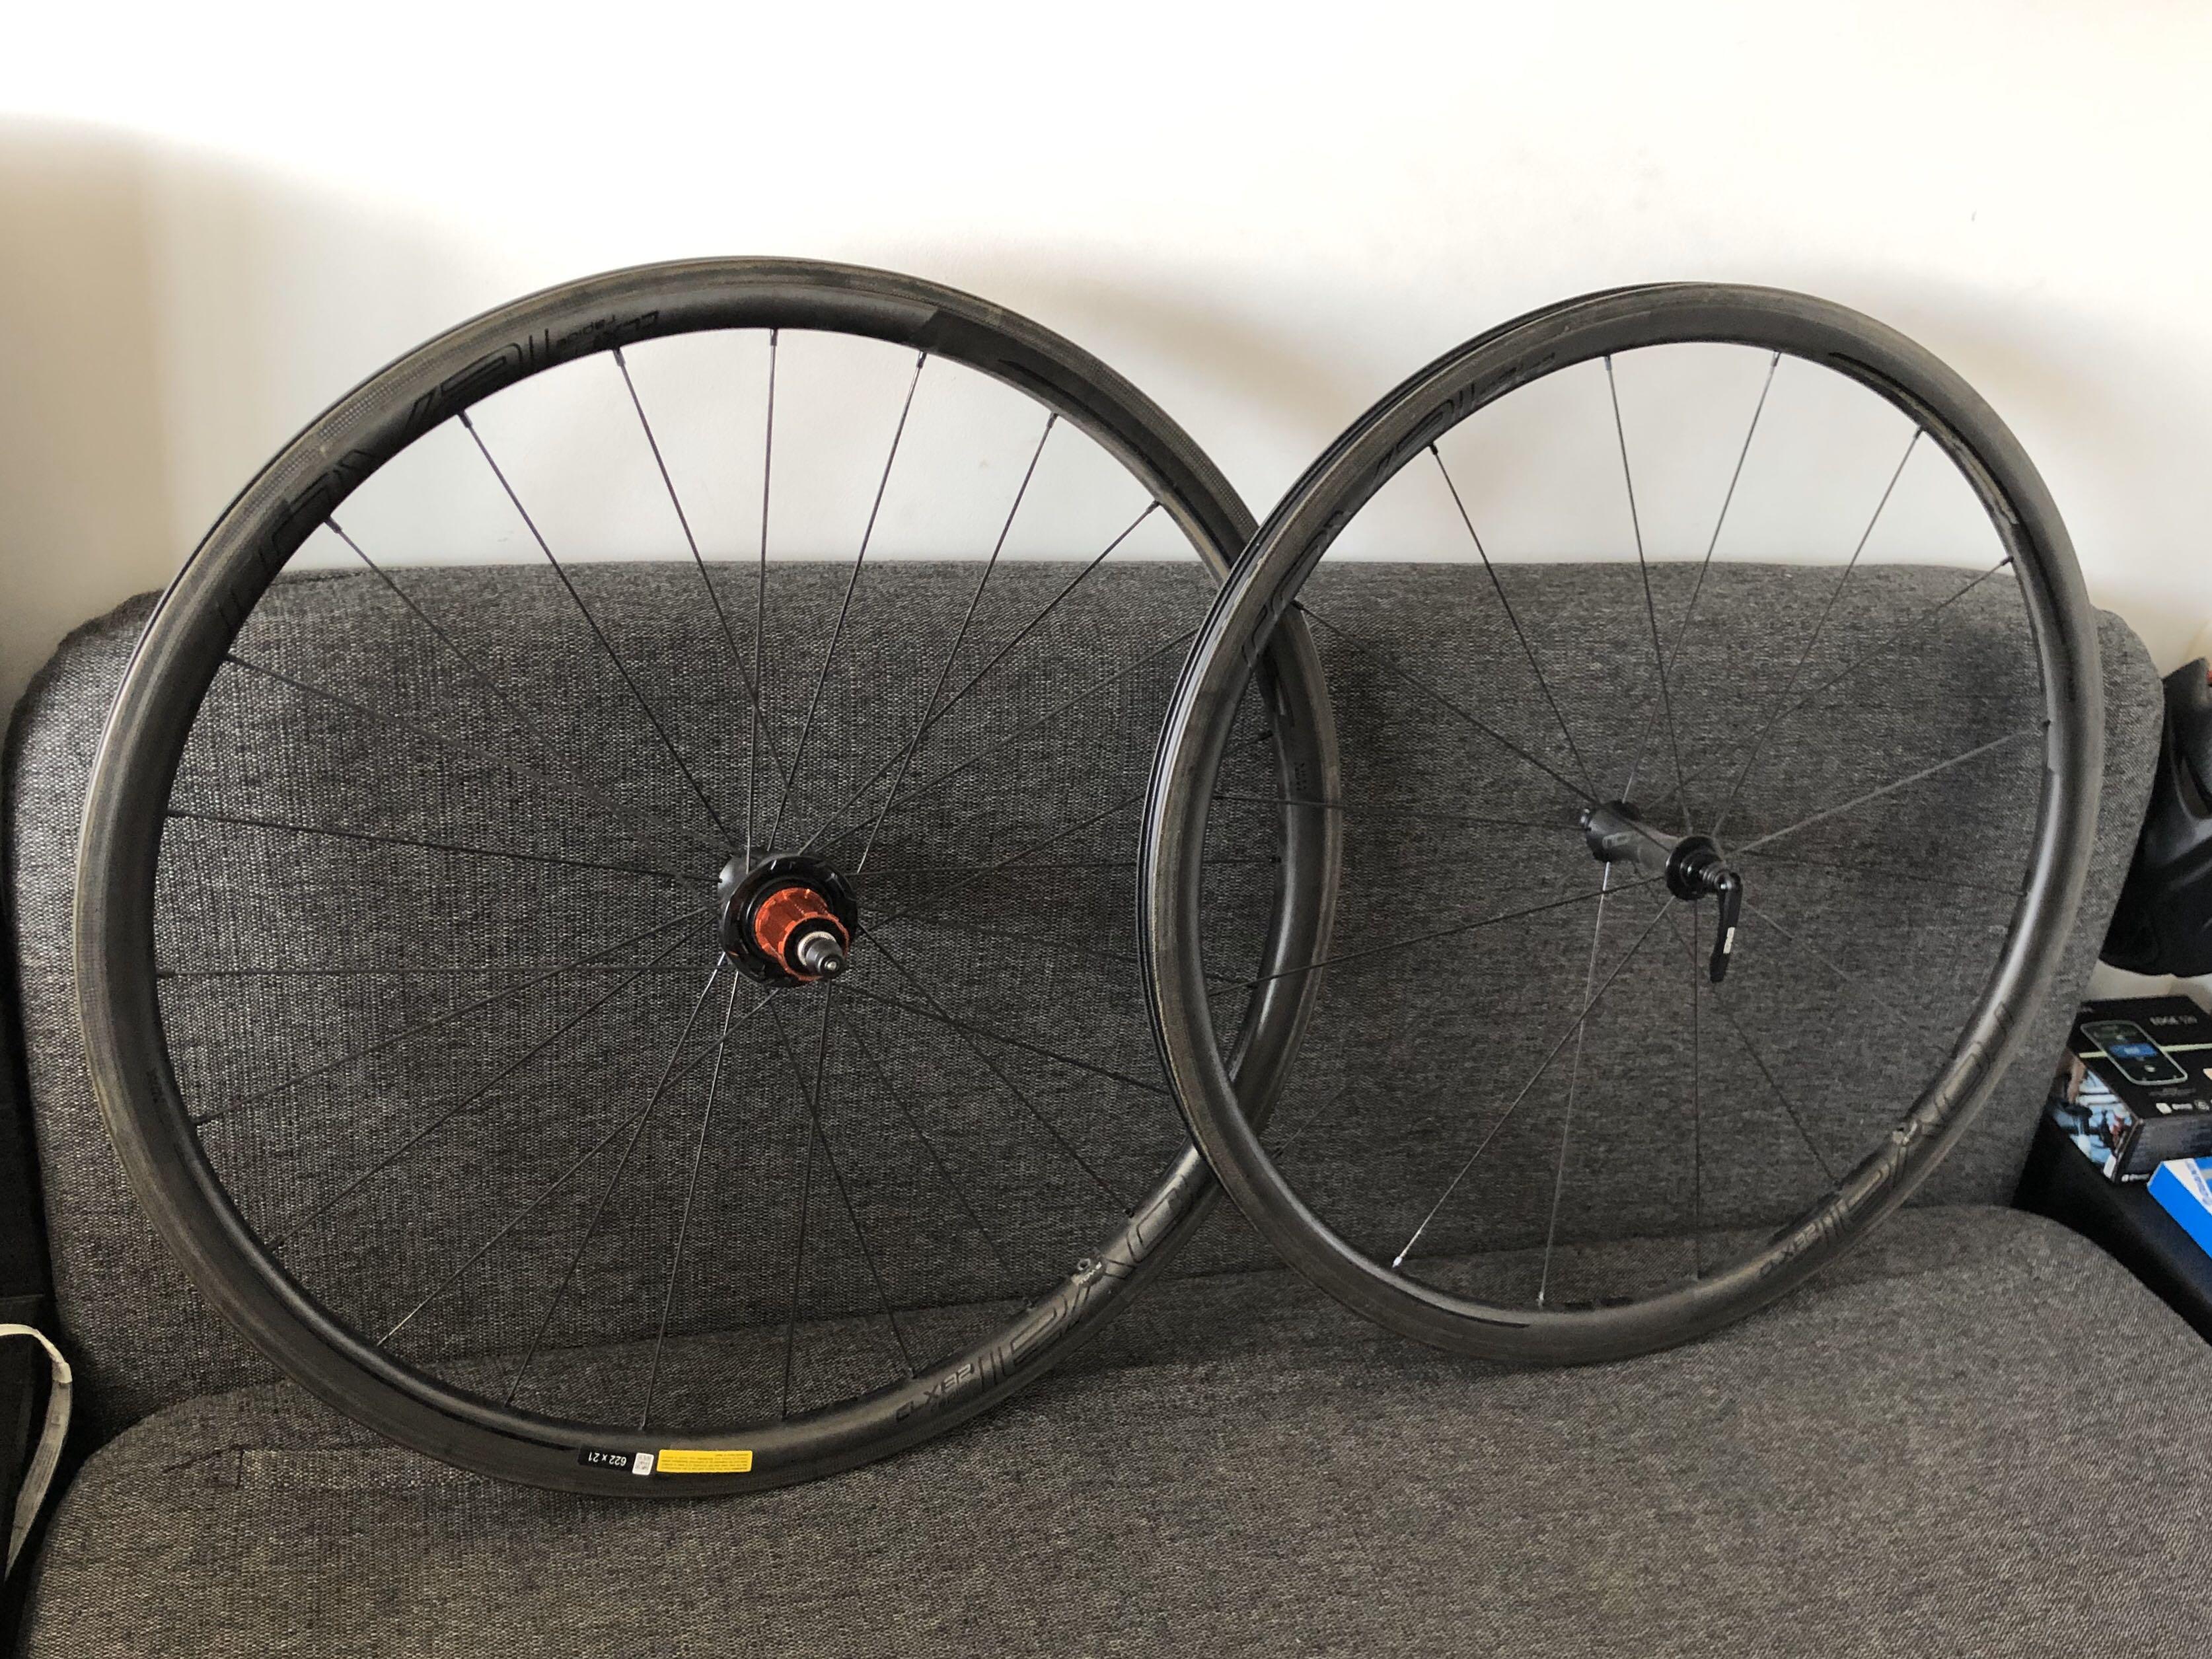 specialized carbon wheels